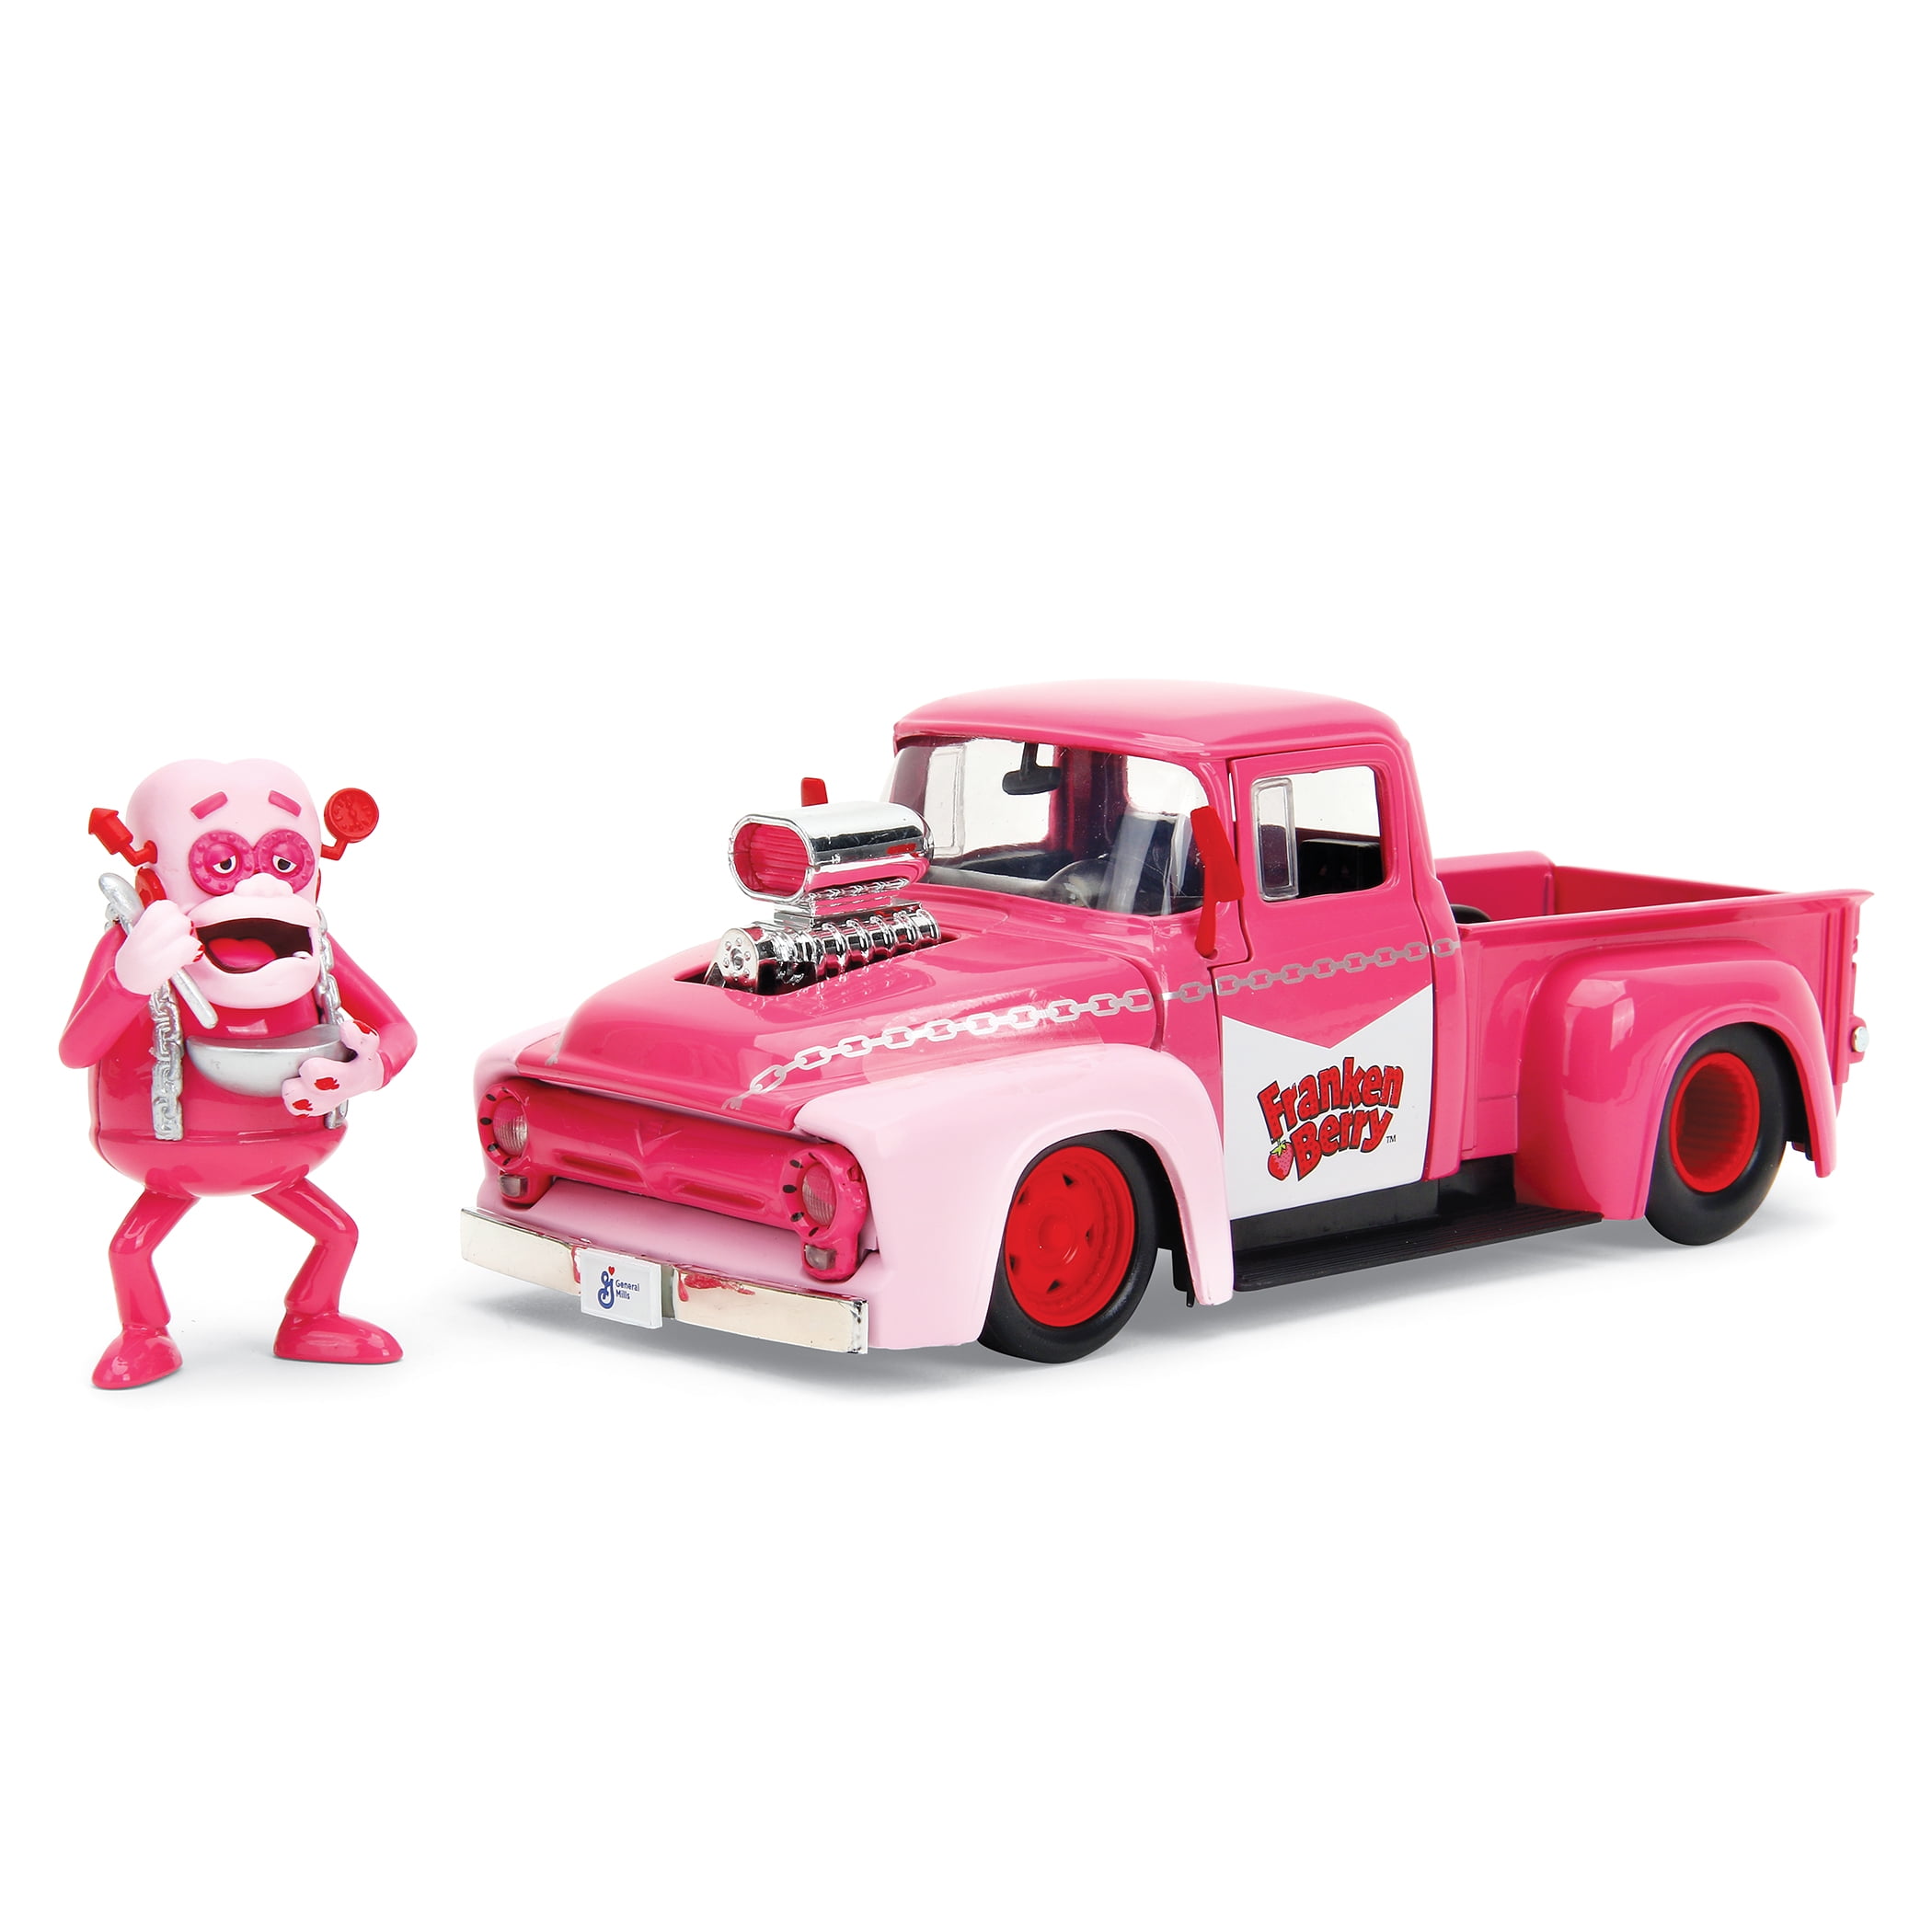 1956 Ford F-100 Pickup Truck with Graphics & Franken Berry Diecast Figure Franken Berry Hollywood Rides Series 1-24 Diecast Model Car, Pink -  Endless Games, EN2959360